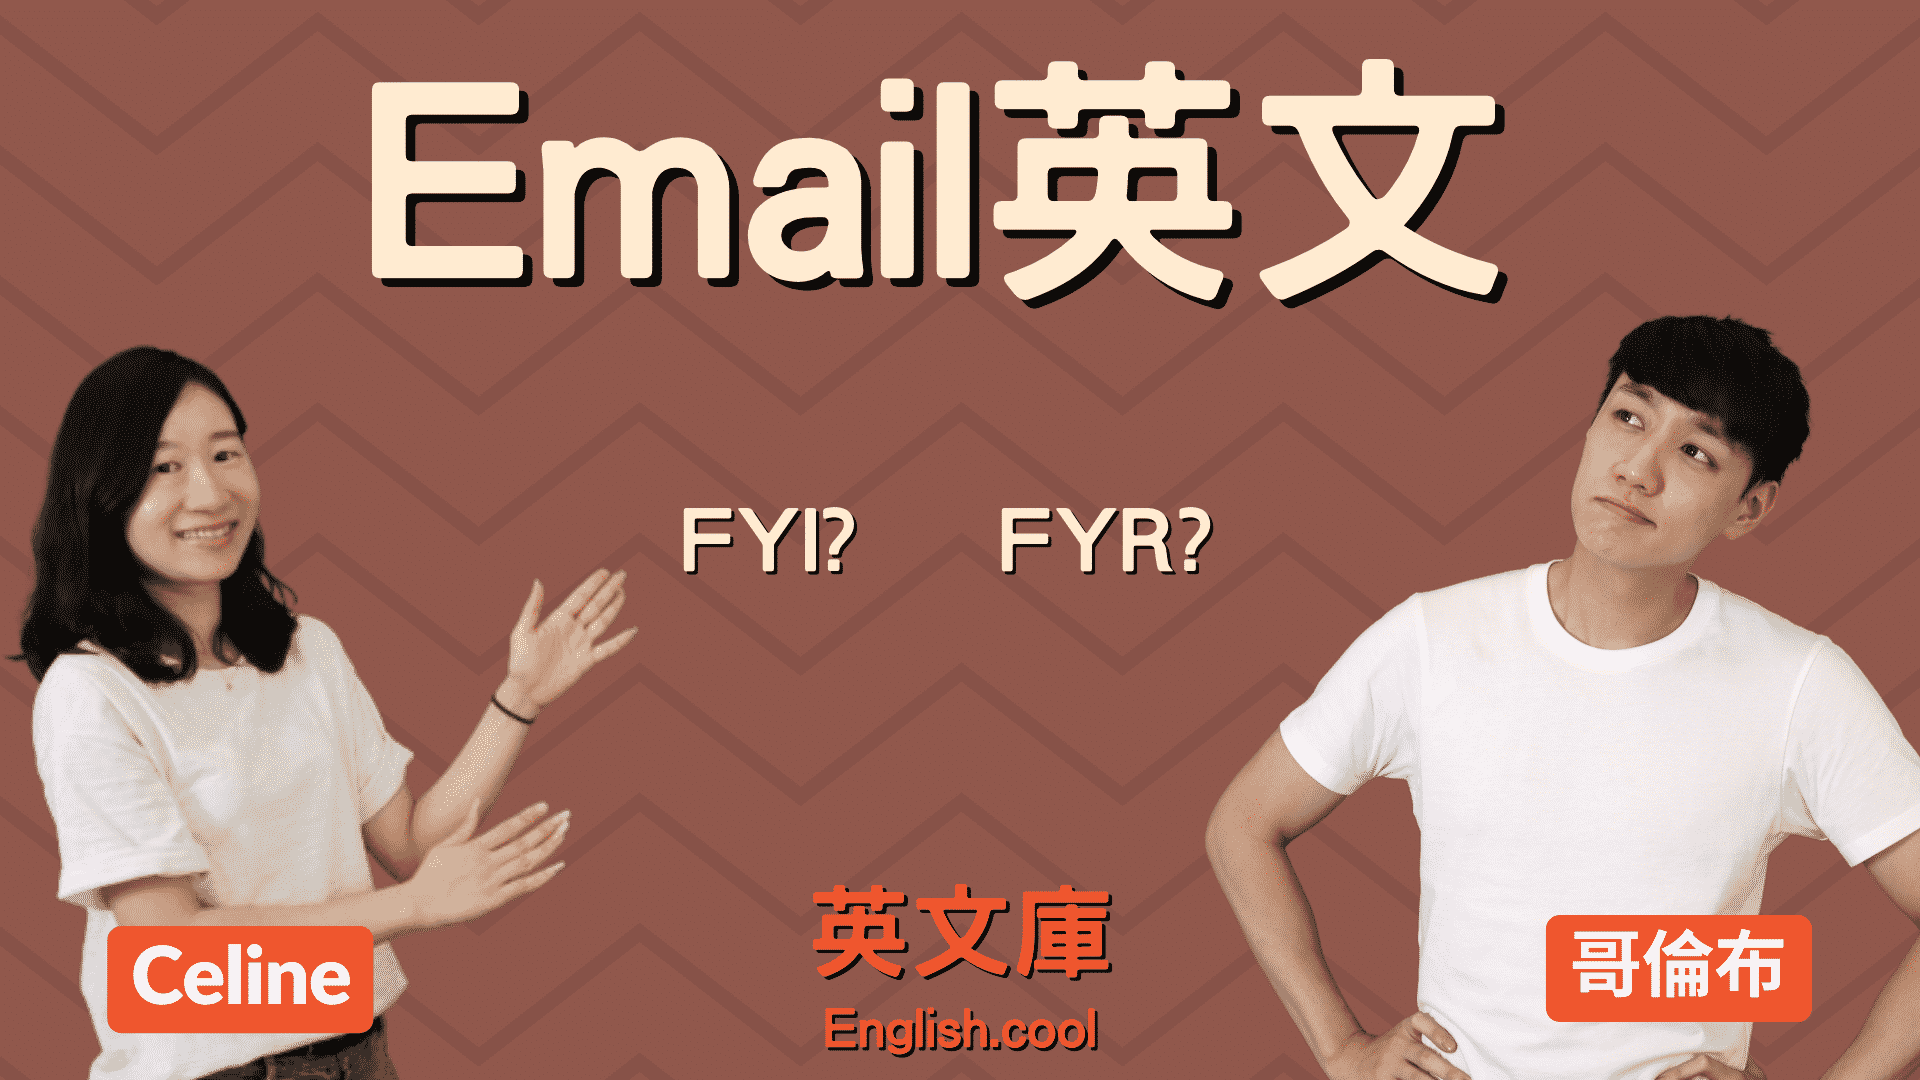 You are currently viewing 【Email 縮寫】FYI 跟 FYR 是什麼意思，差在哪？